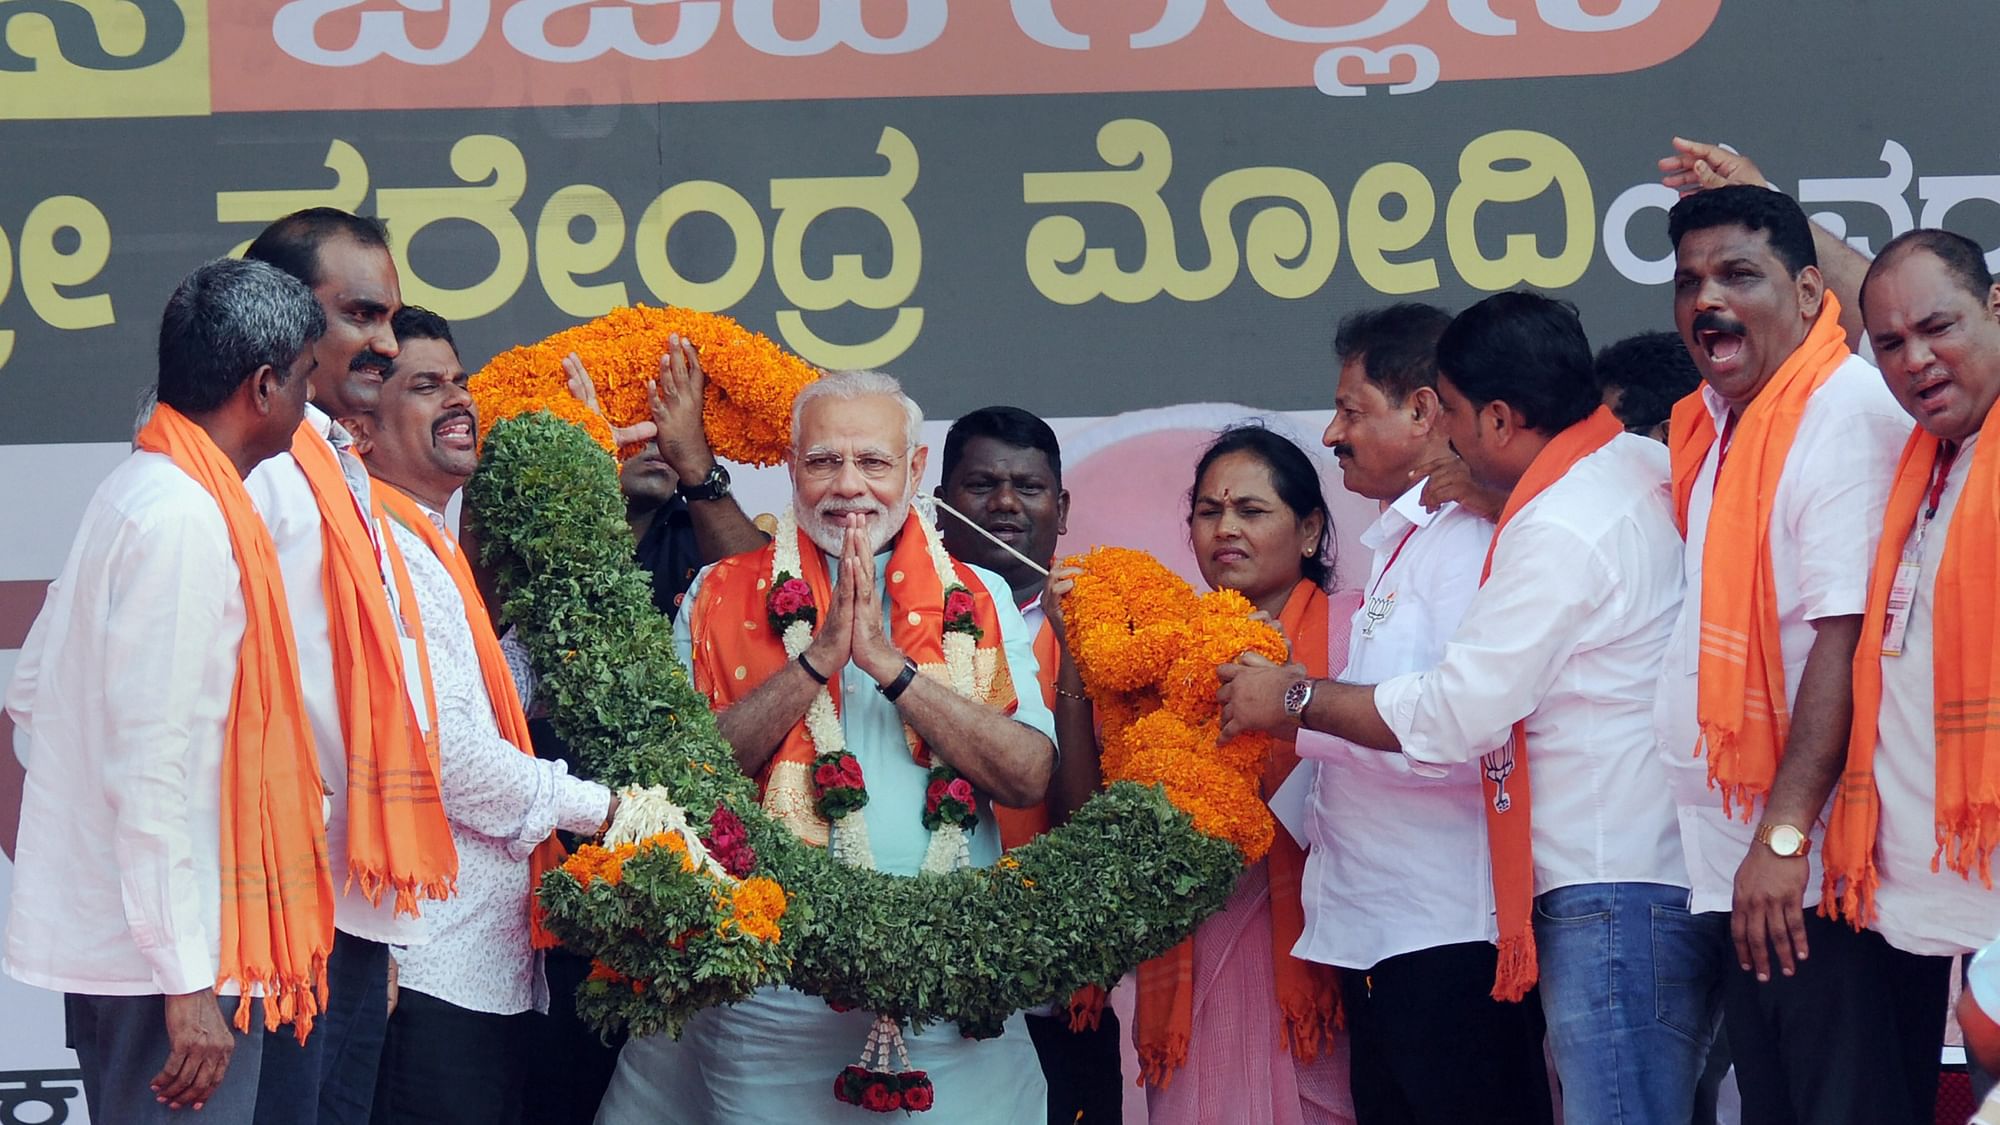 File photo of Prime Minister Narendra Modi being garlanded by BJP workers during Karnataka election rally.